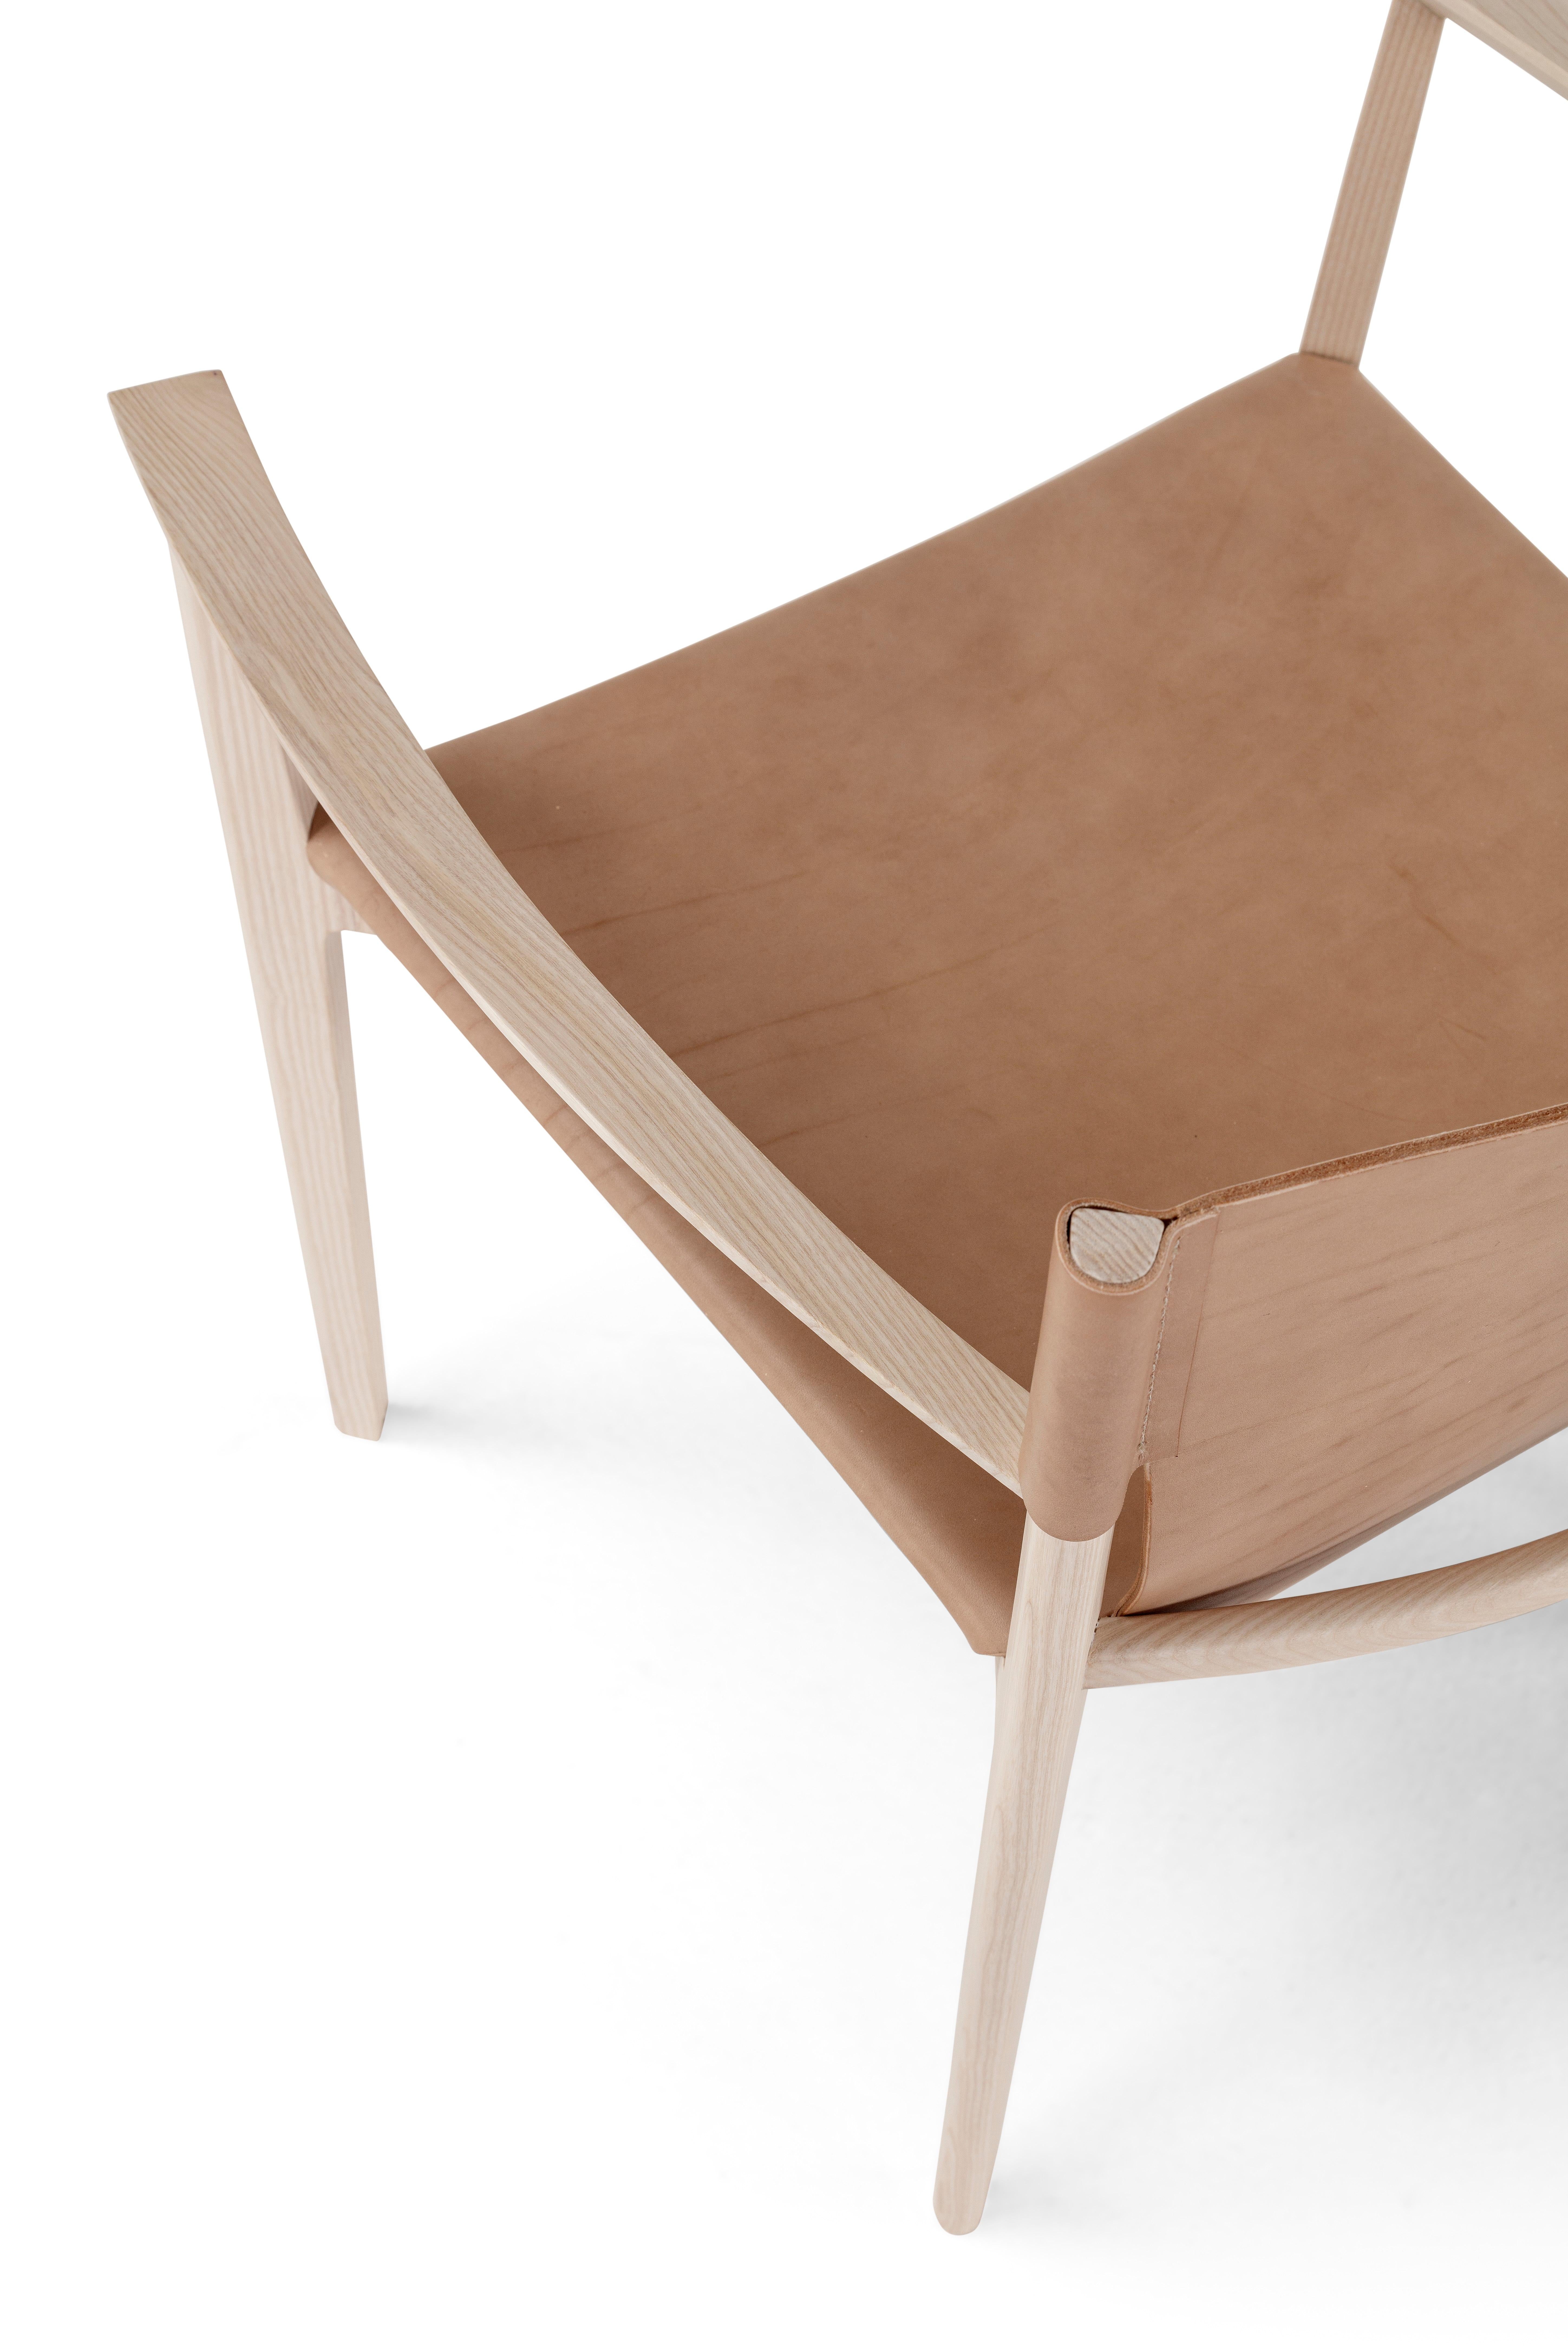 Contemporary Wooden Chair 'Stilt', Cuoio In New Condition For Sale In Paris, FR